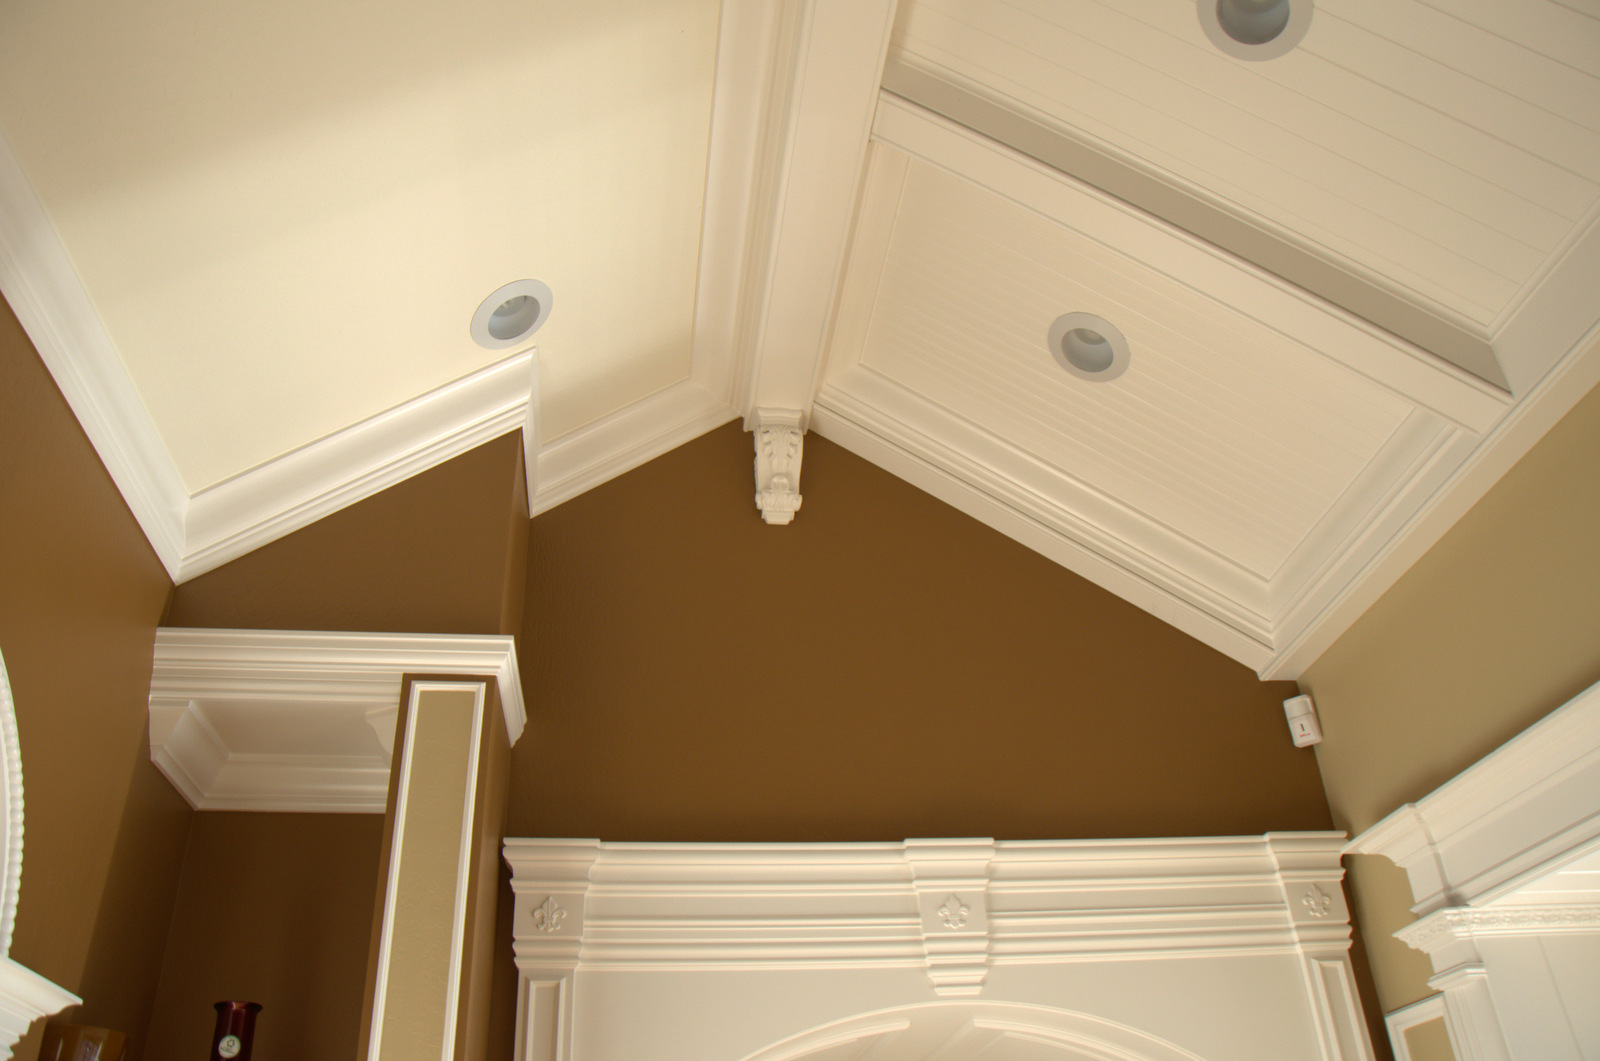 Roof Framing Geometry Rake Crown Mouldings With No Transitions